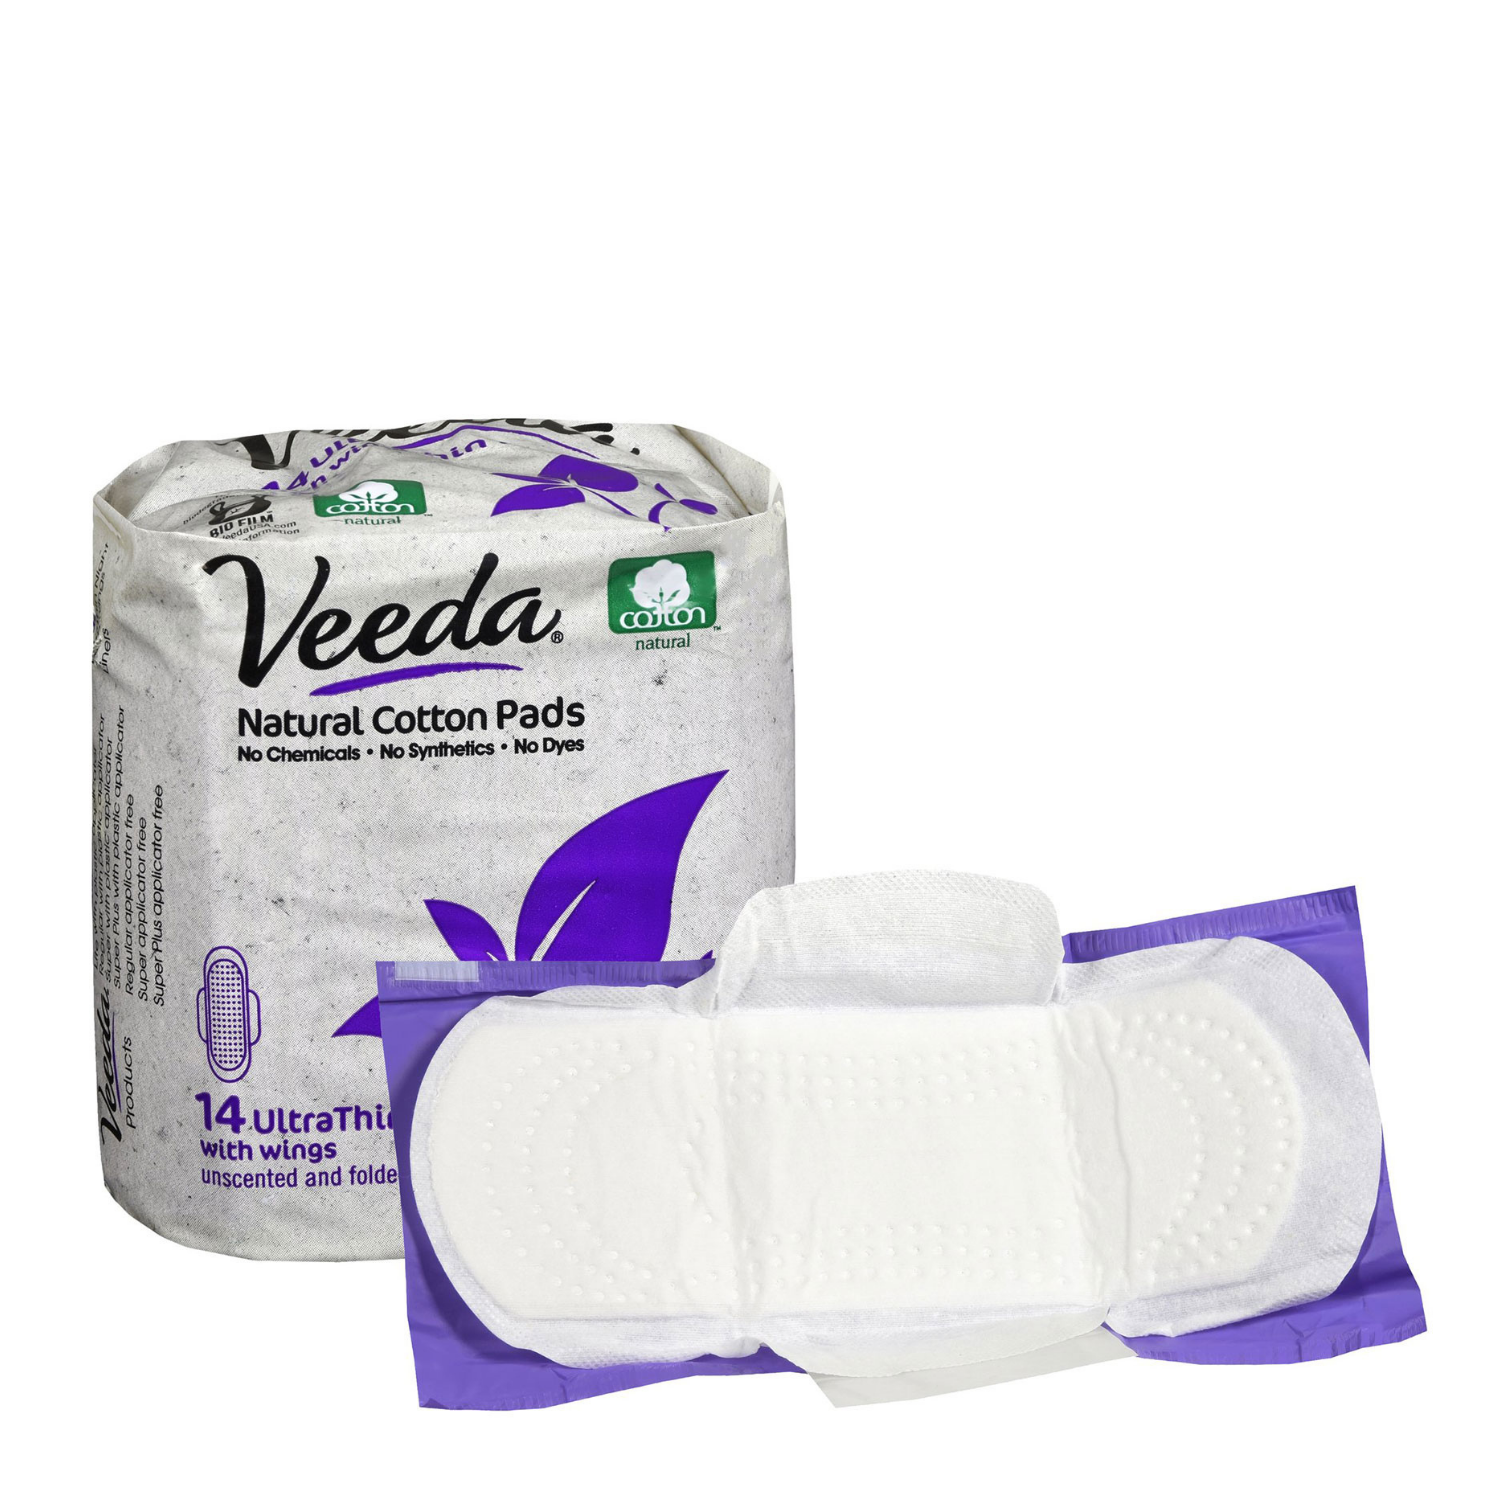 Veeda Ultra Thin Natural Cotton Day Pads 8 Packs x 14 Pads